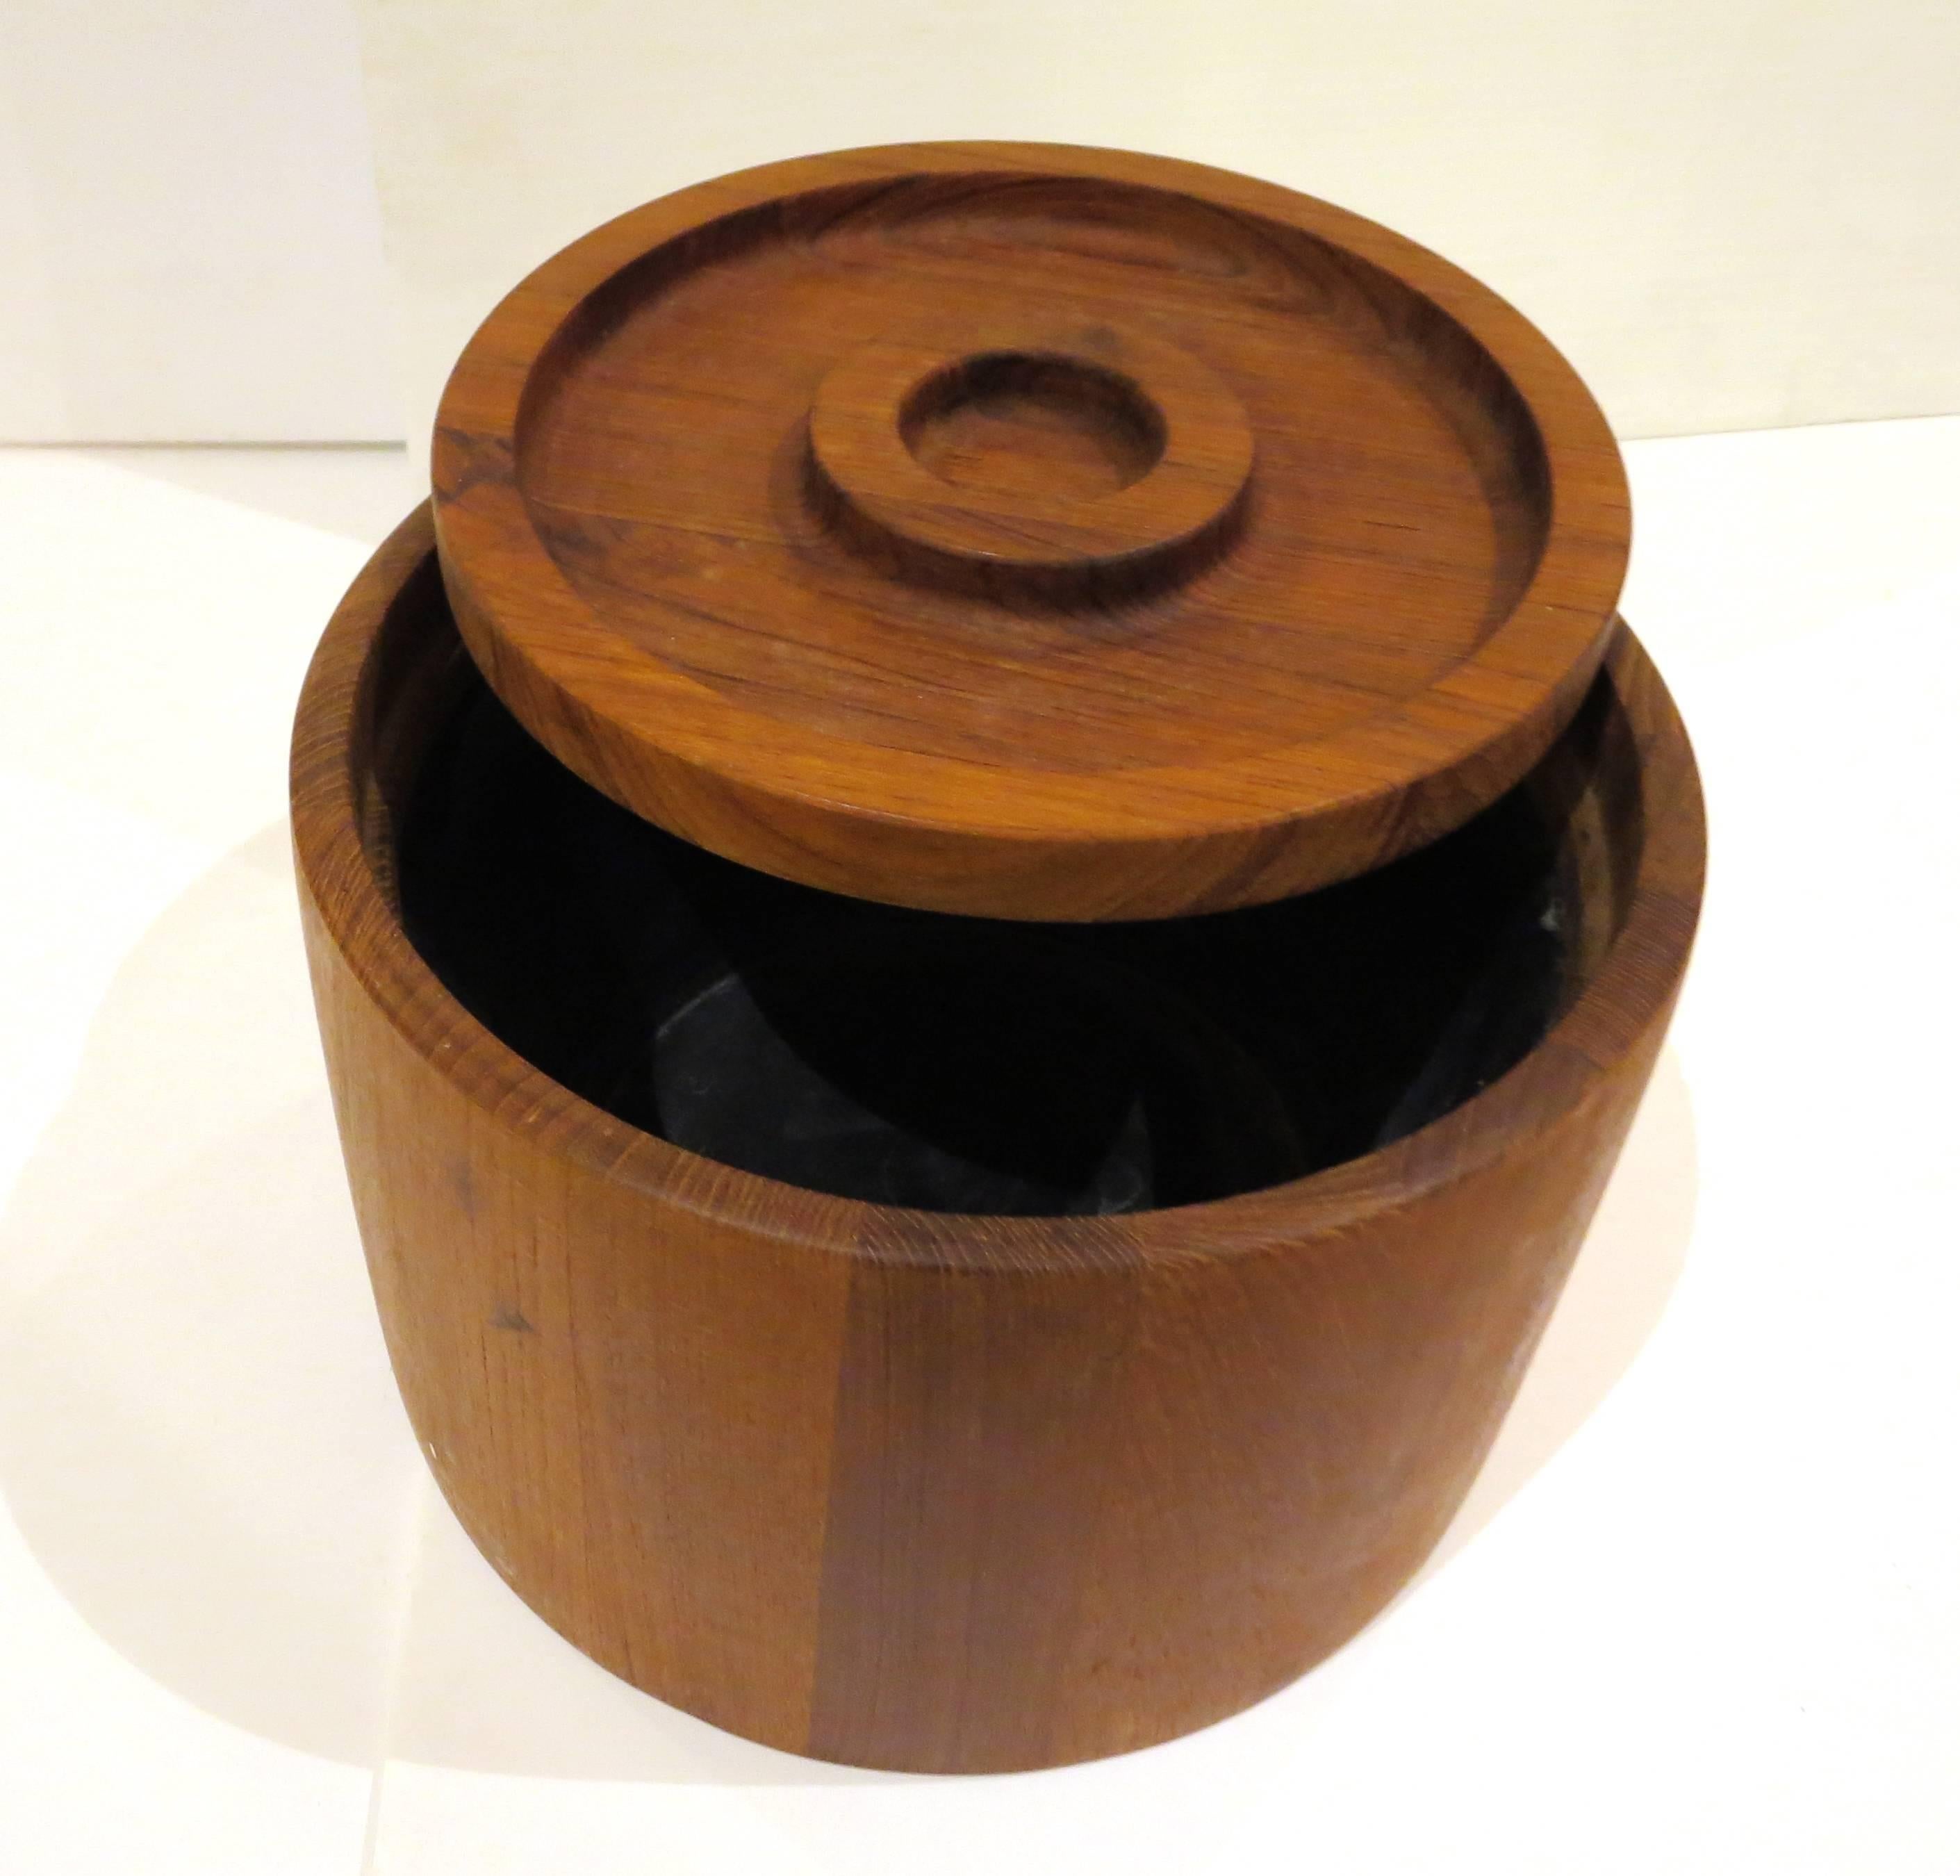 A very cool design on this solid teak ice bucket, design by Quistgaard for Dansk, circa 1970s with black plastic liner and great condition with removable lid.